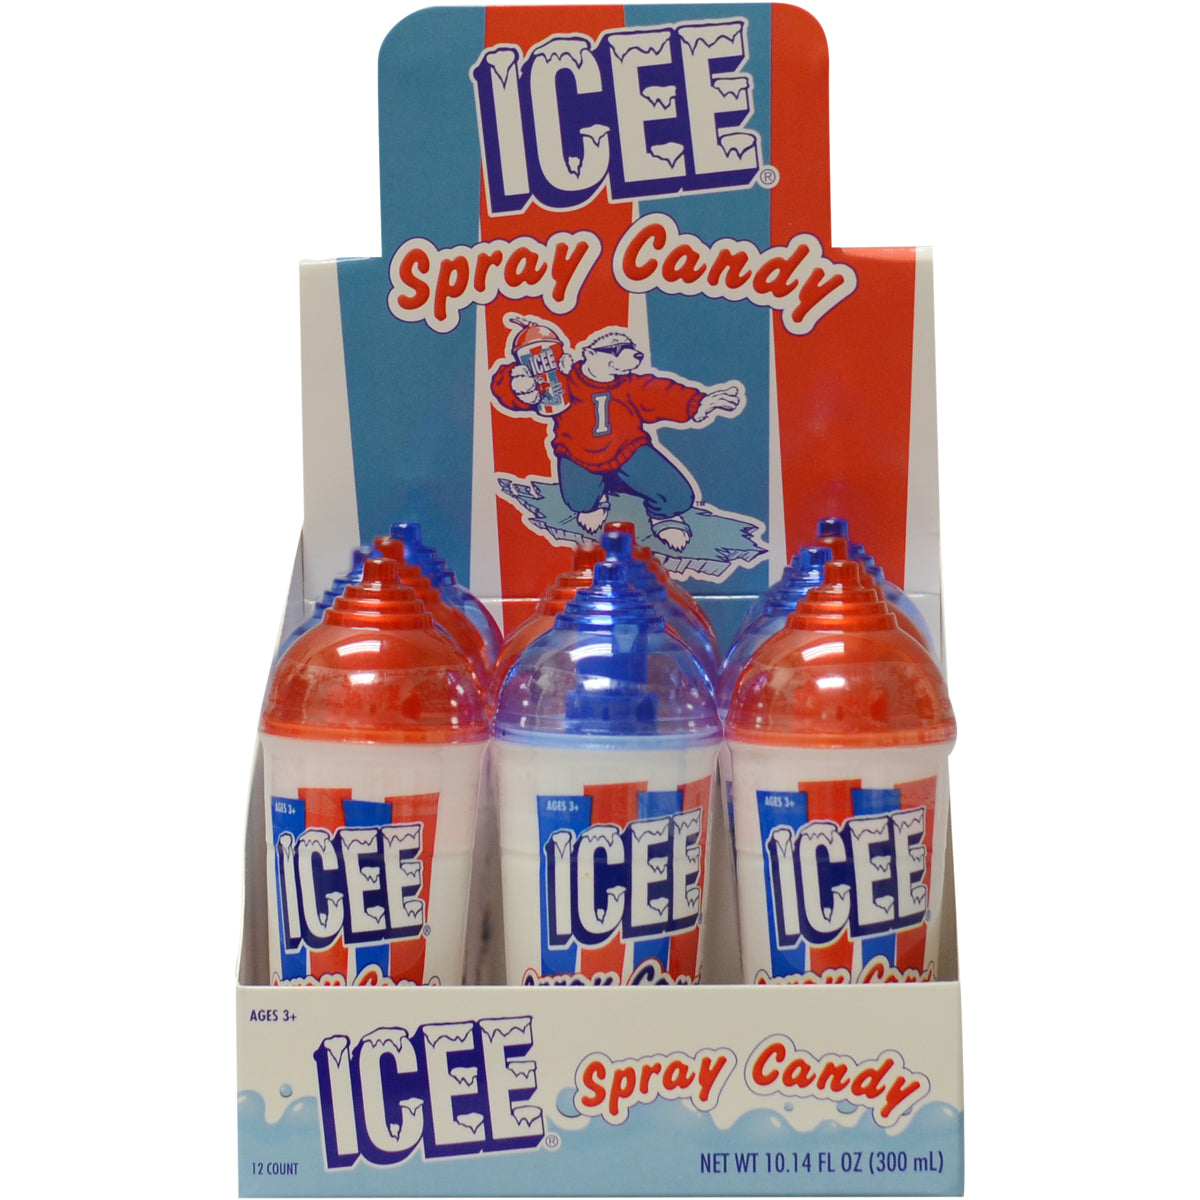 Icee Spray Candy 85oz Pack Or 12ct Box — Sweeties Candy Of Arizona 3919